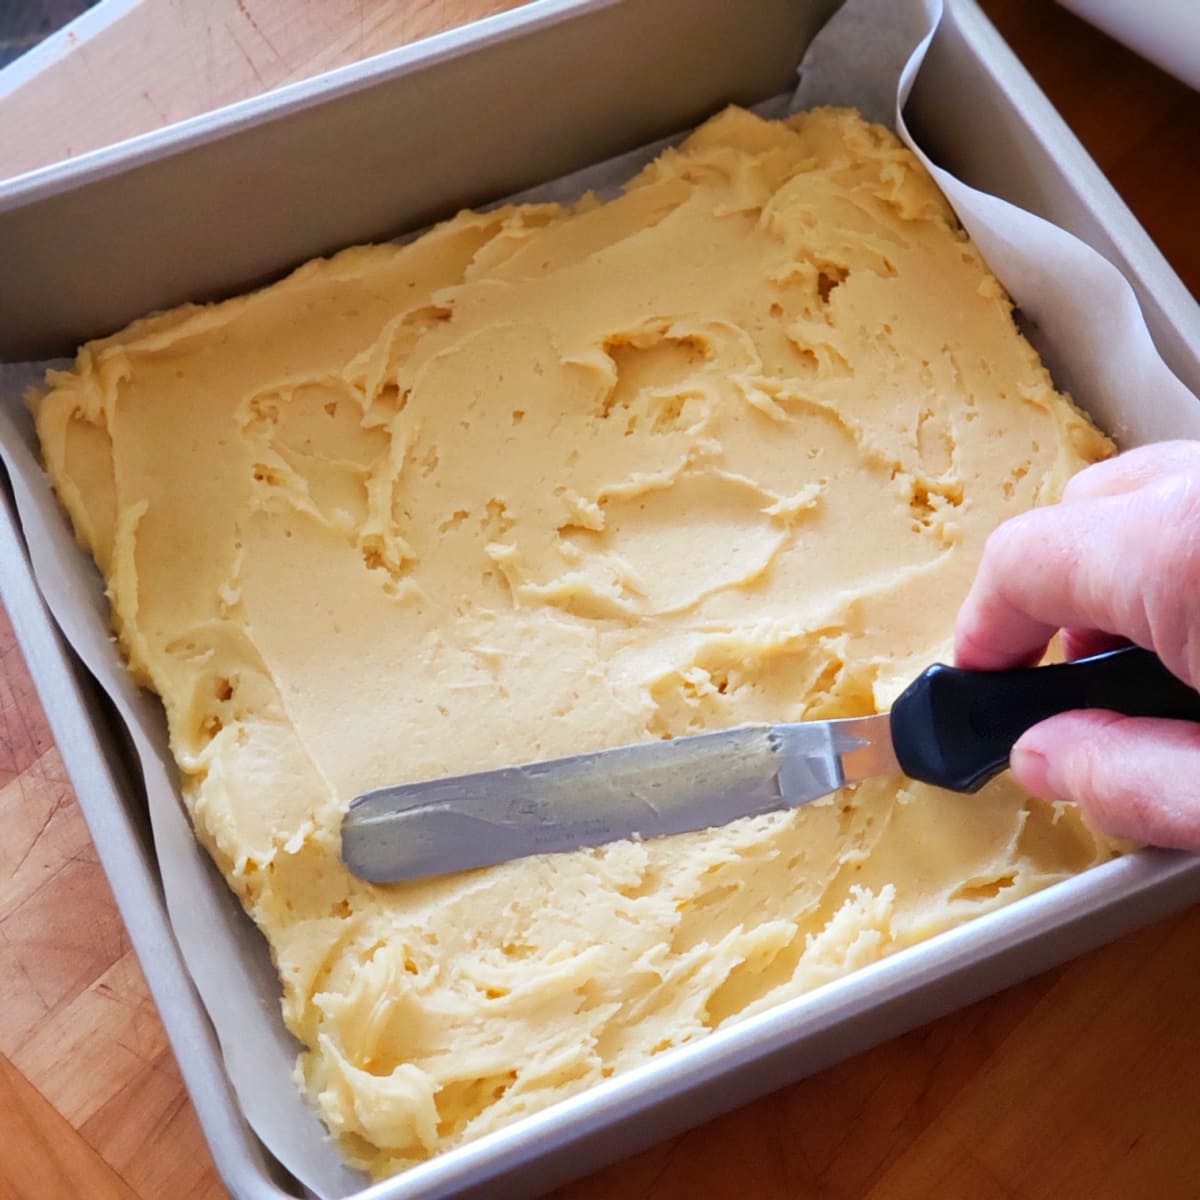 A hand holding an offset spatula smooths blondie dough into a parchment-lined baking dish